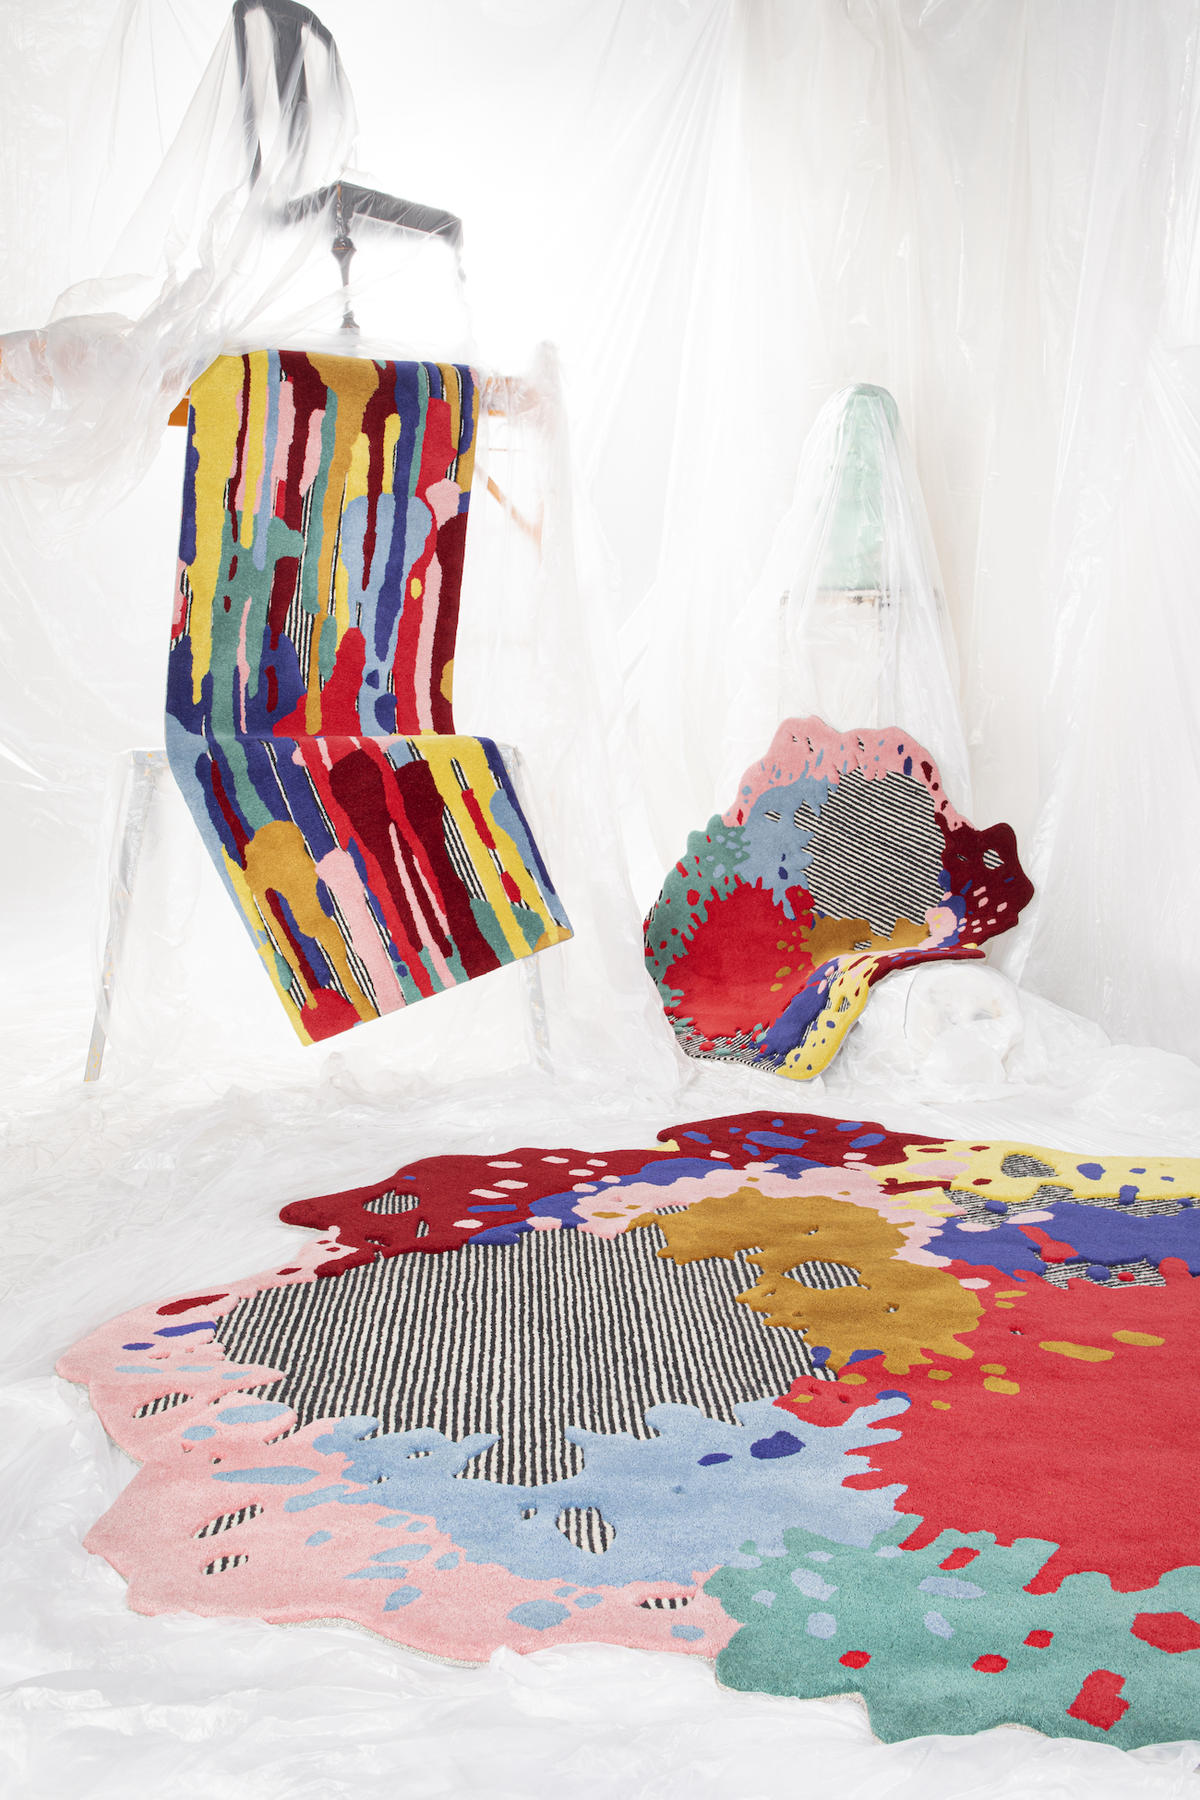 This fiber artist uses an old-school tufting gun to ‘paint with yarn’